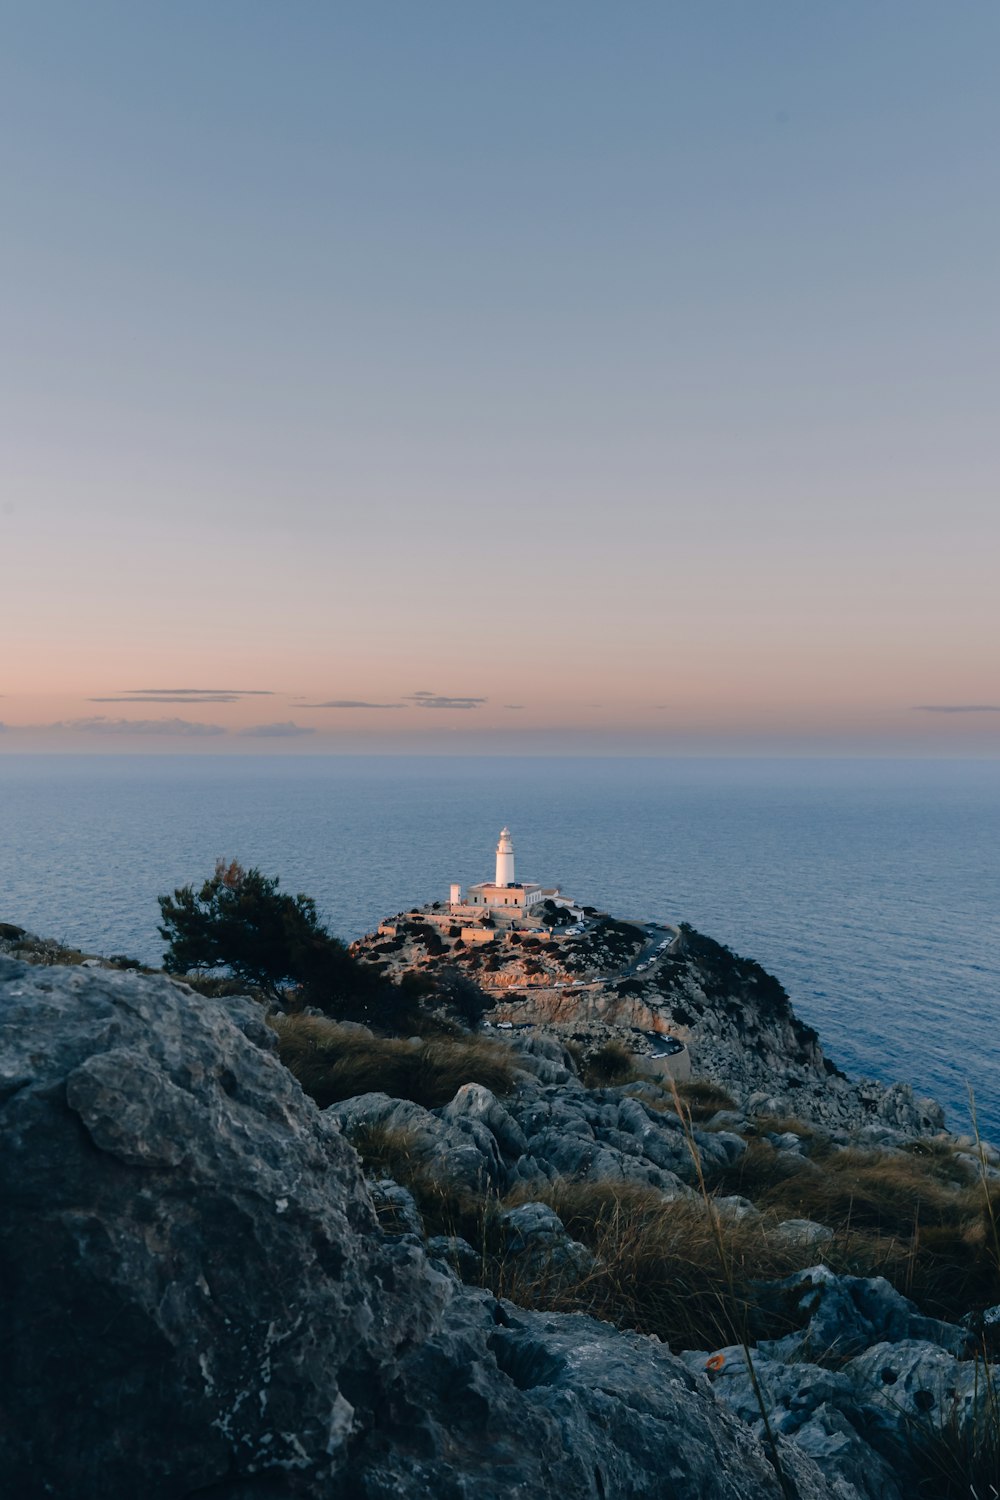 a light house sitting on top of a rocky cliff